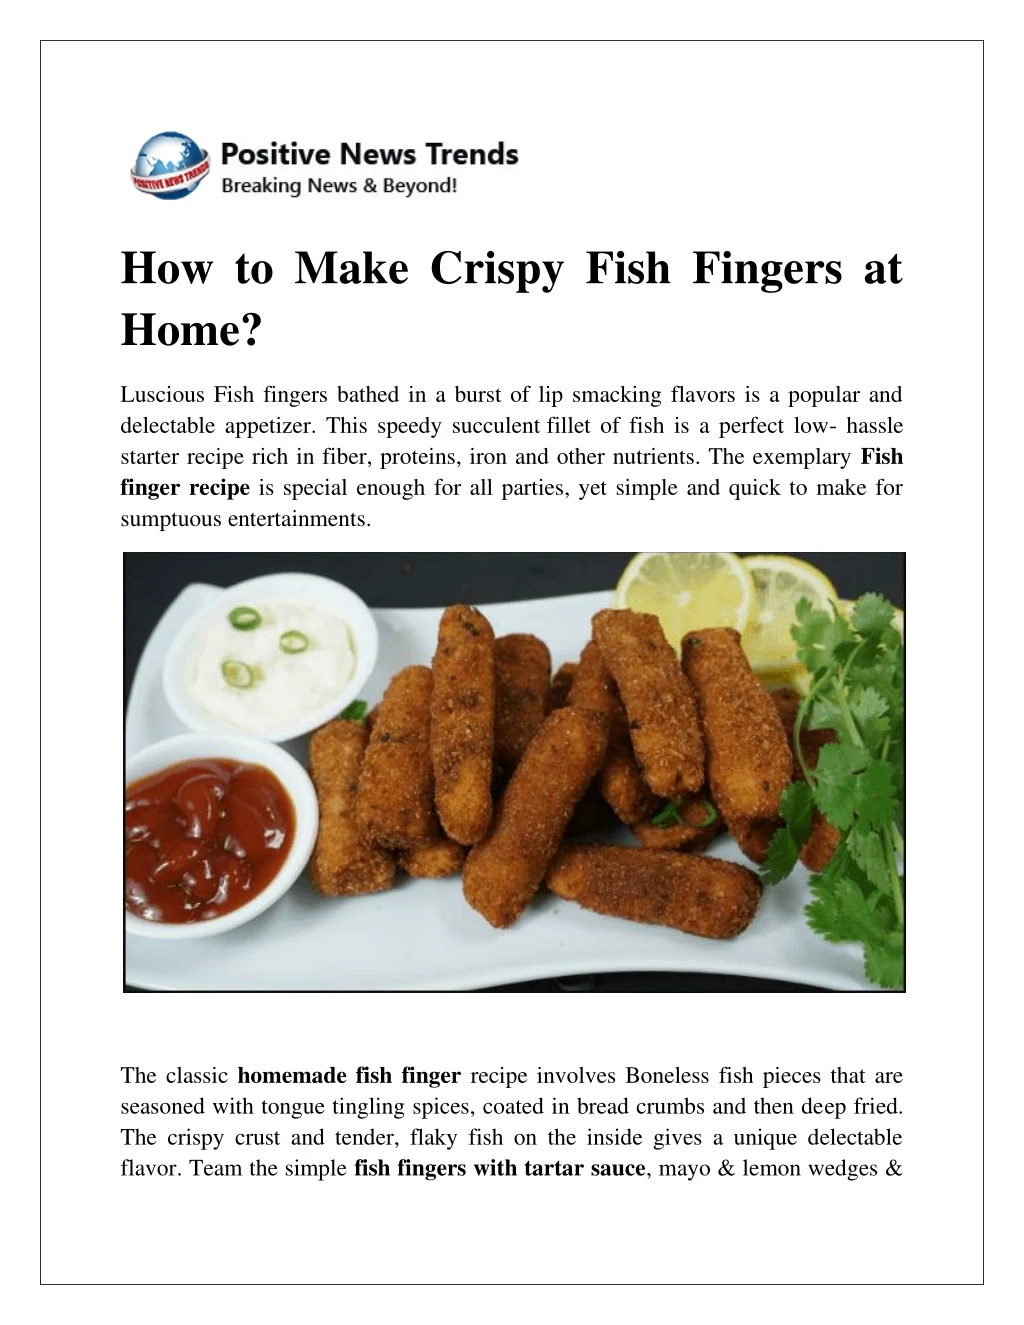 how to make crispy fish fingers at home